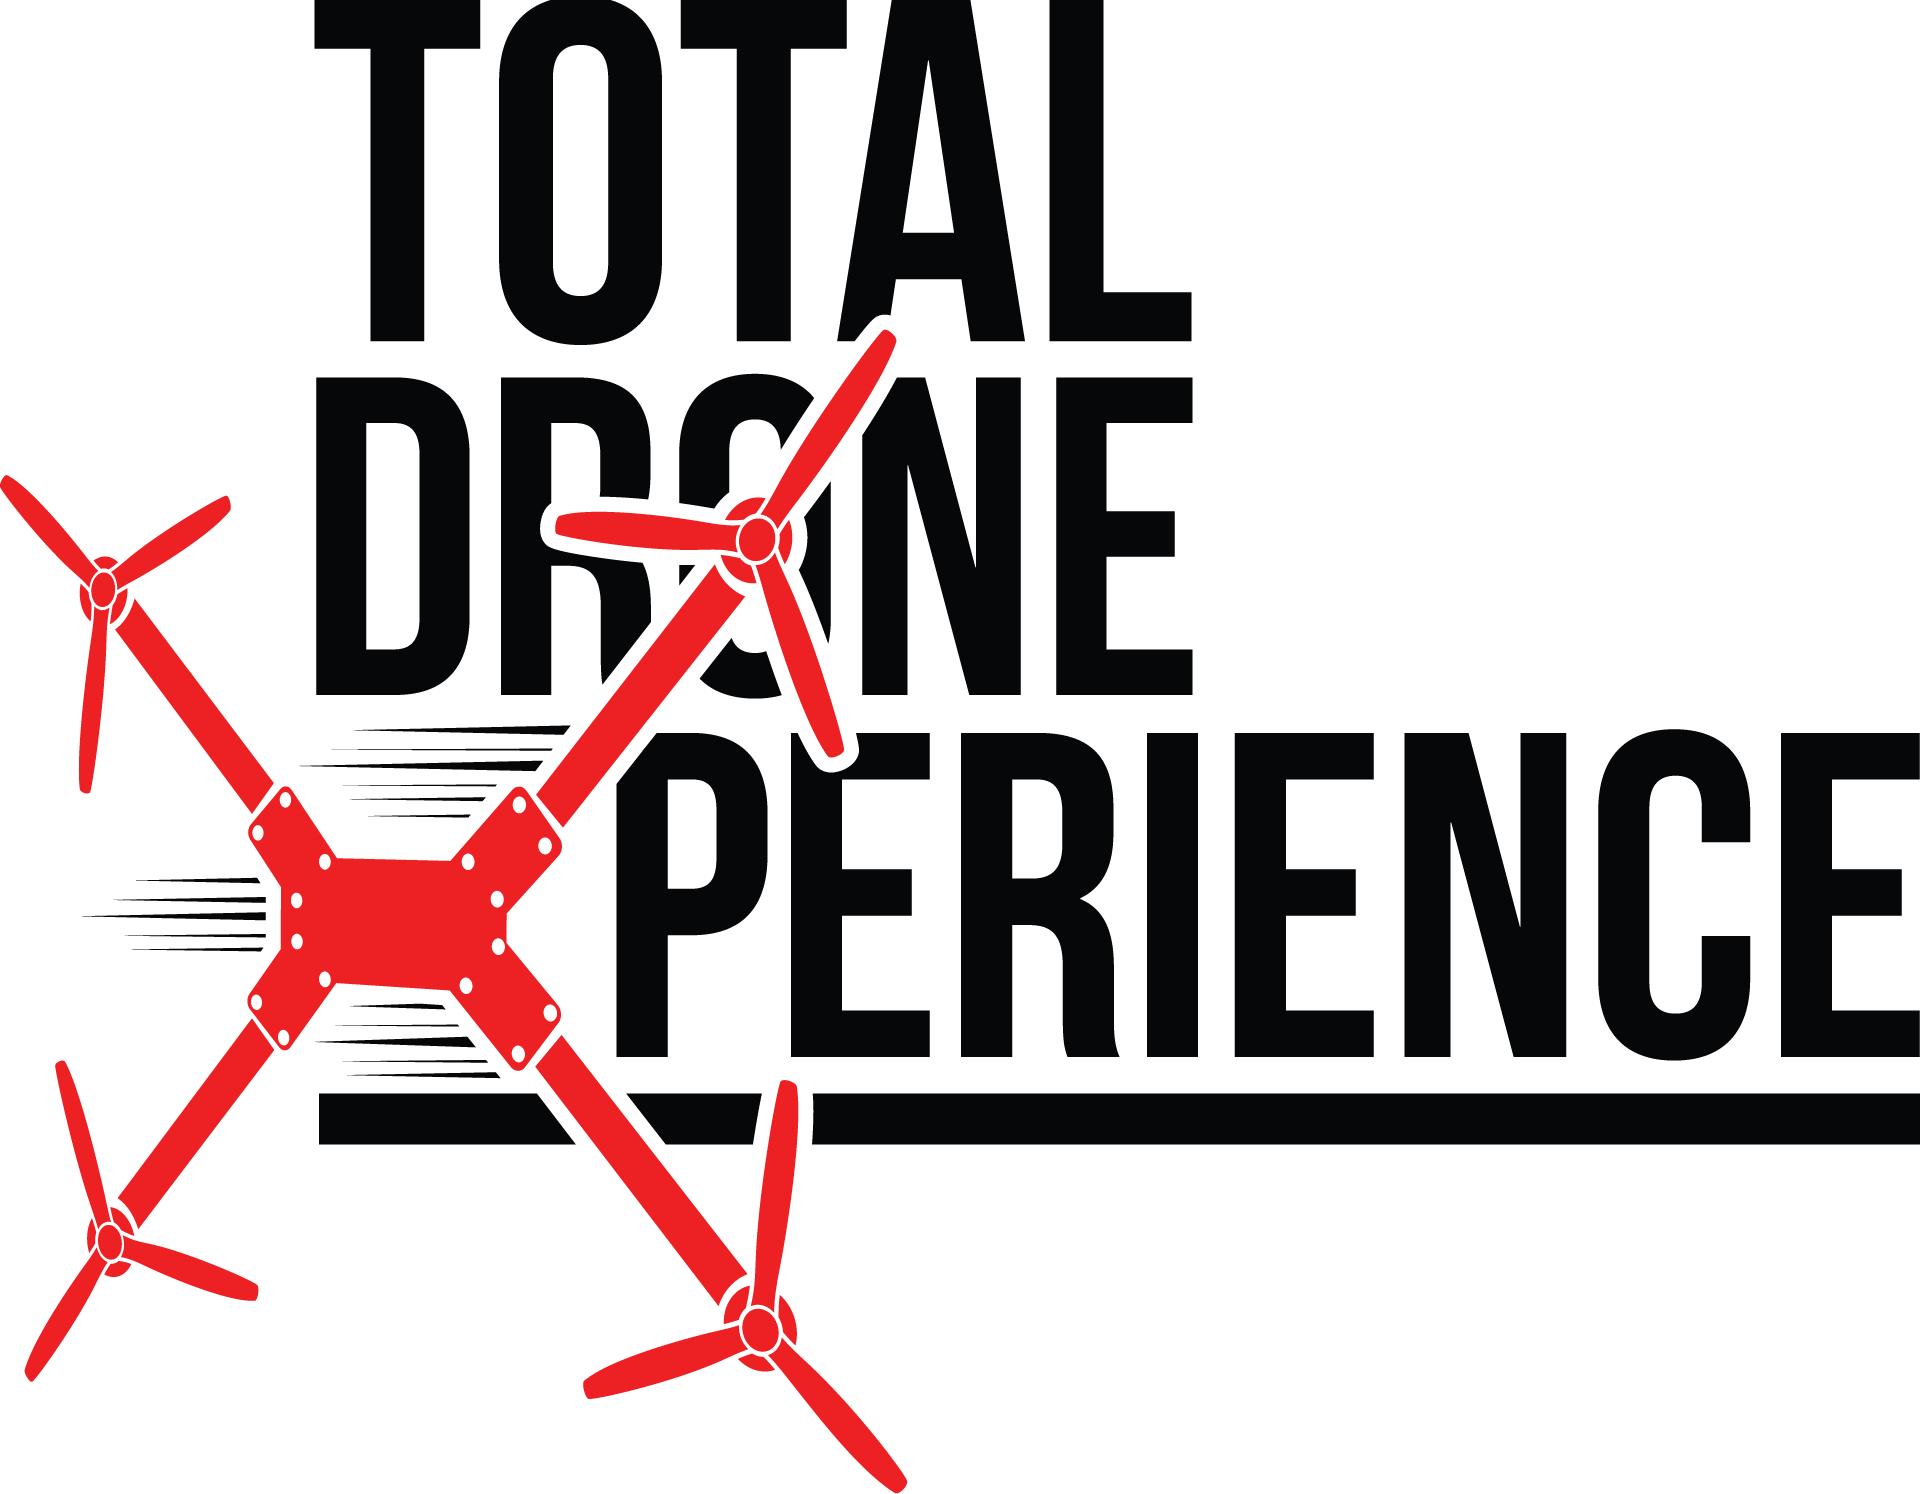 Total Drone Xperience